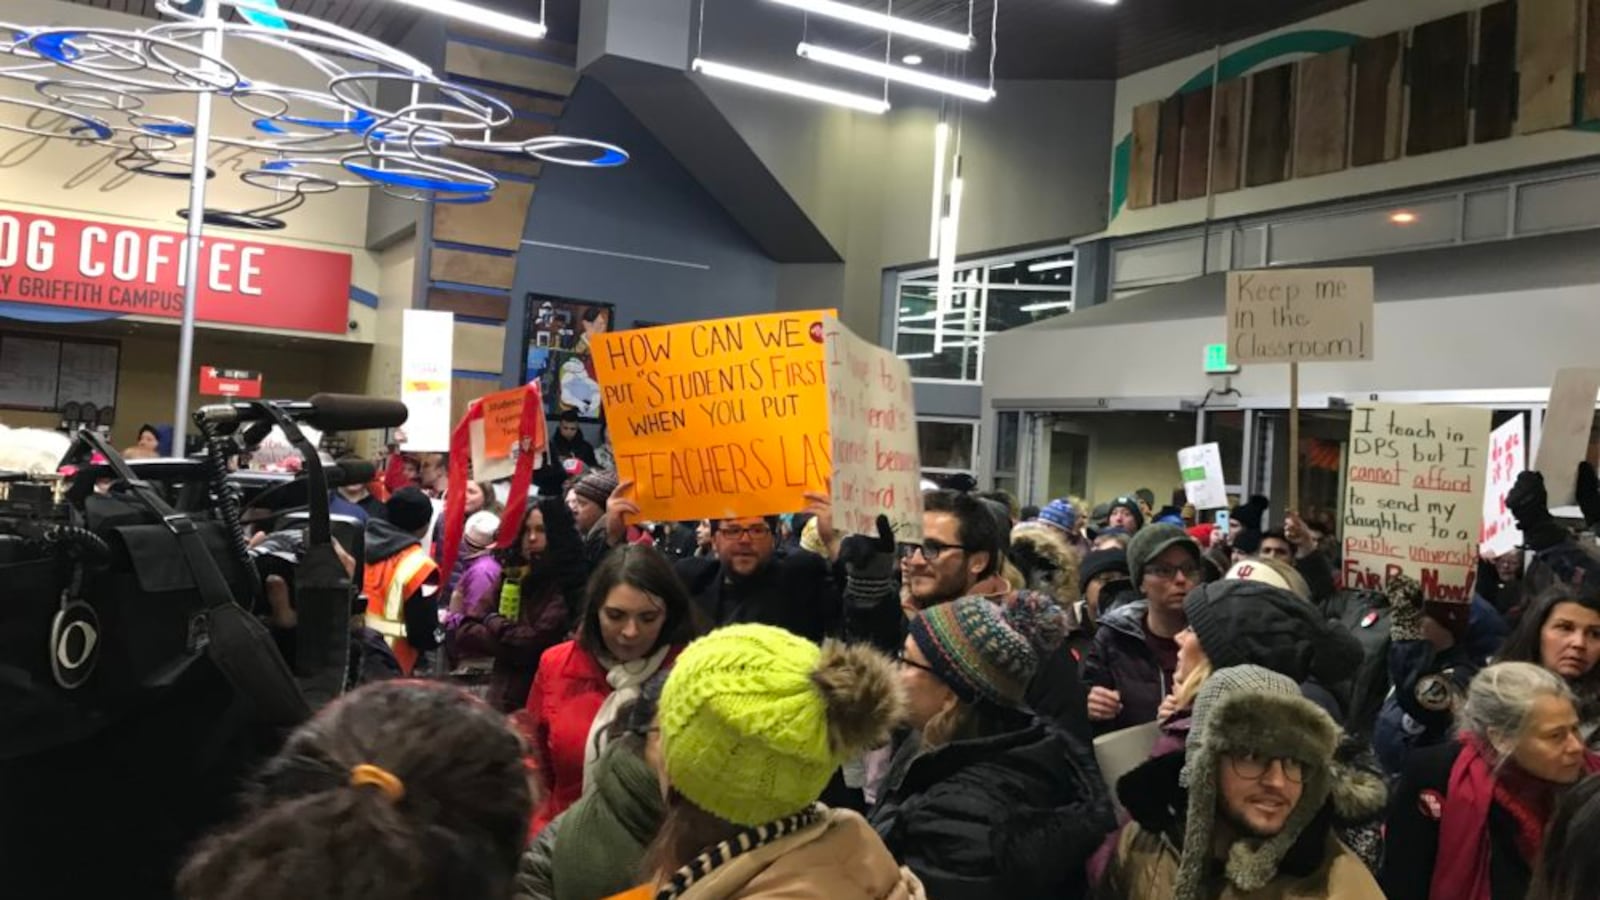 Denver teachers pack the lobby of the district headquarters to demand fair pay.